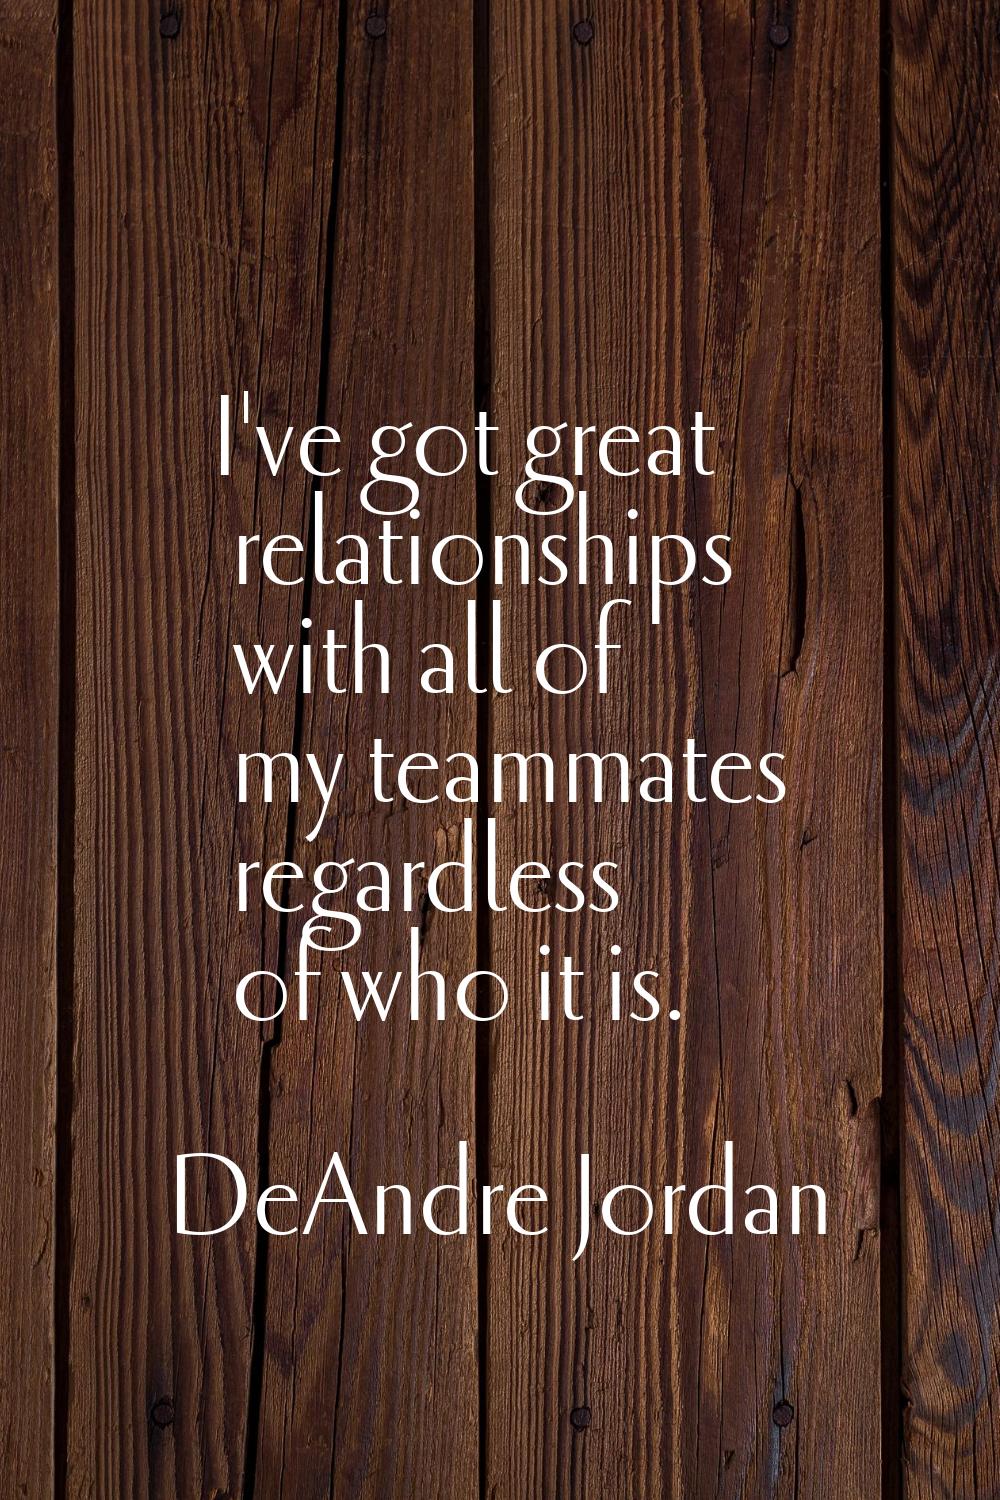 I've got great relationships with all of my teammates regardless of who it is.